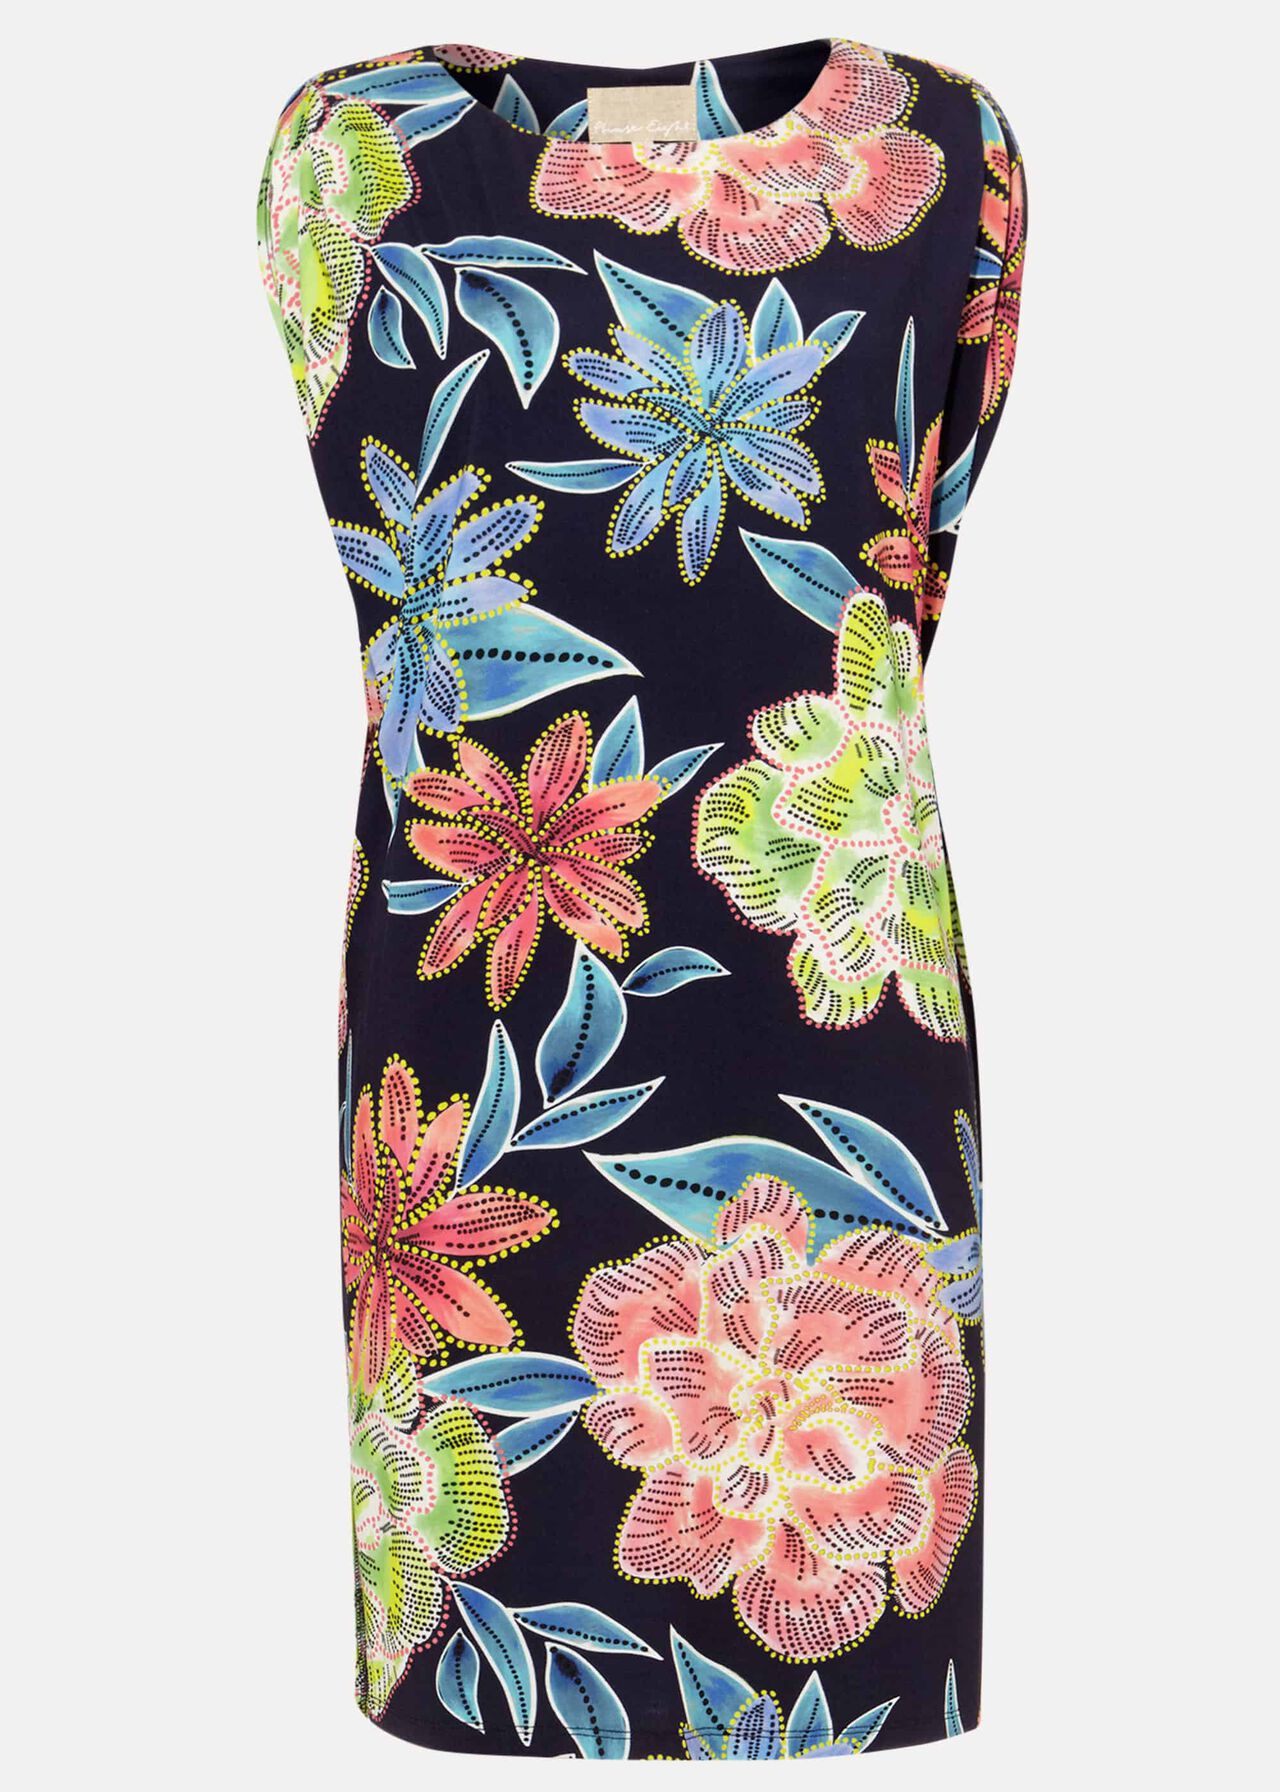 Delany Floral Beach Dress